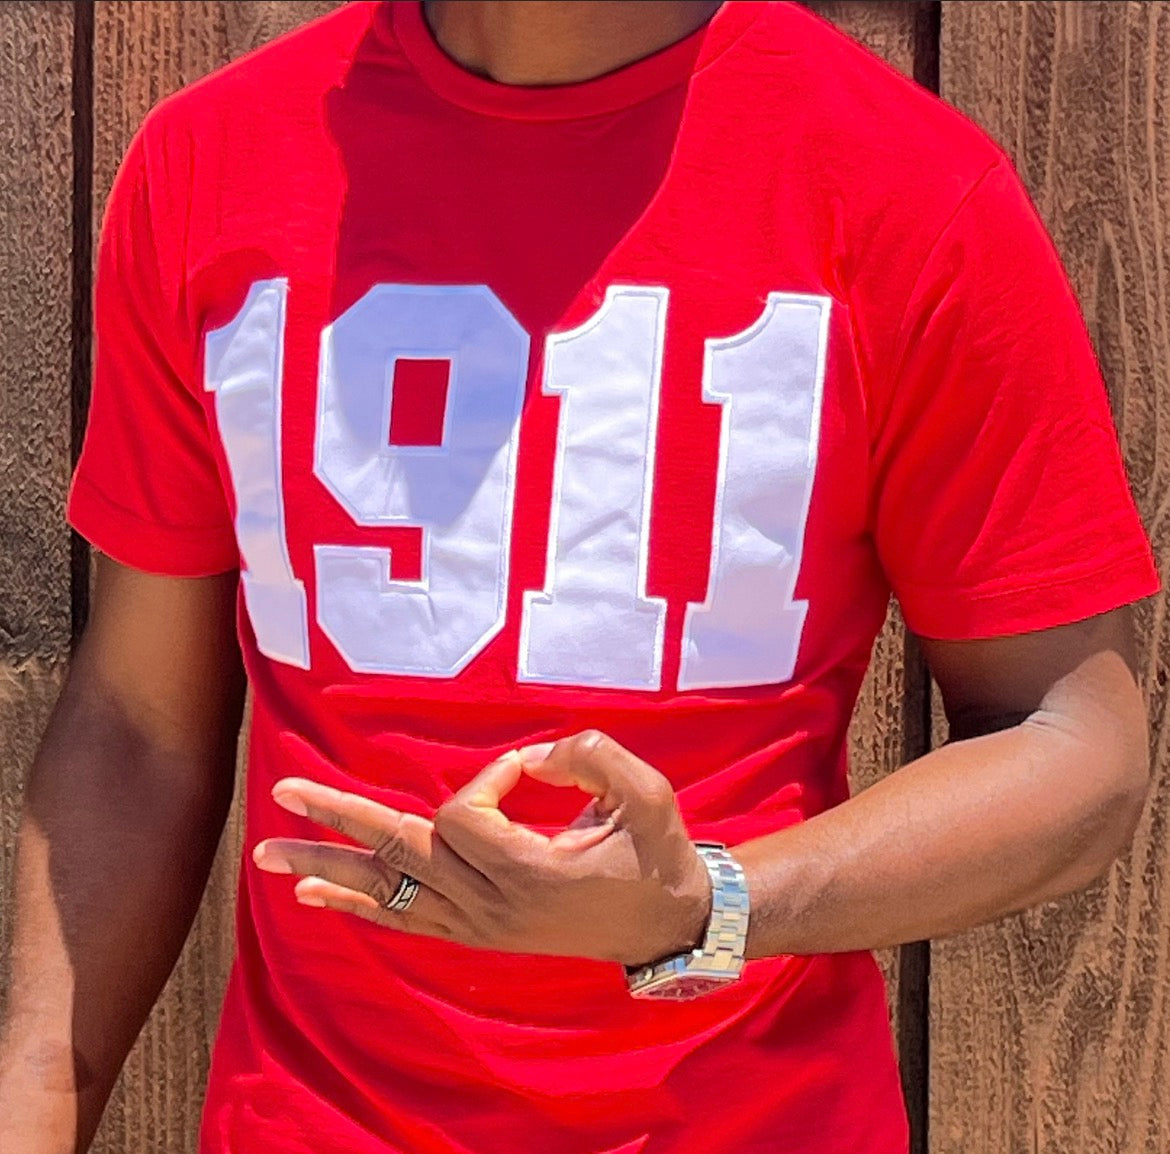 Kappa Alpha Psi 1911 / is – Wht Red - Embroidery Nupekave Shirt T